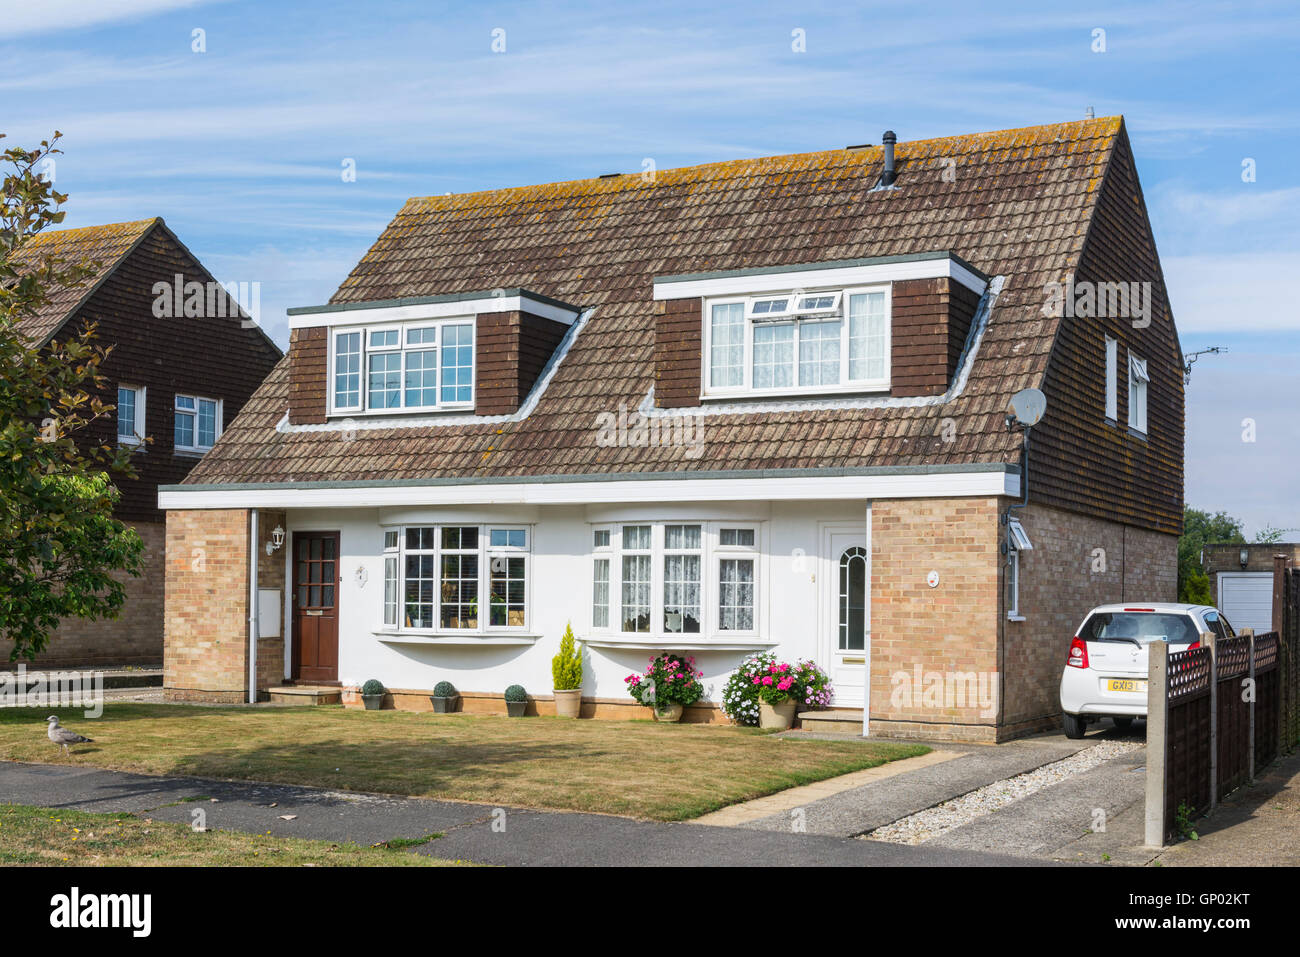 Dormer Windows On A Semi Detached House In England Uk Stock Photo Alamy